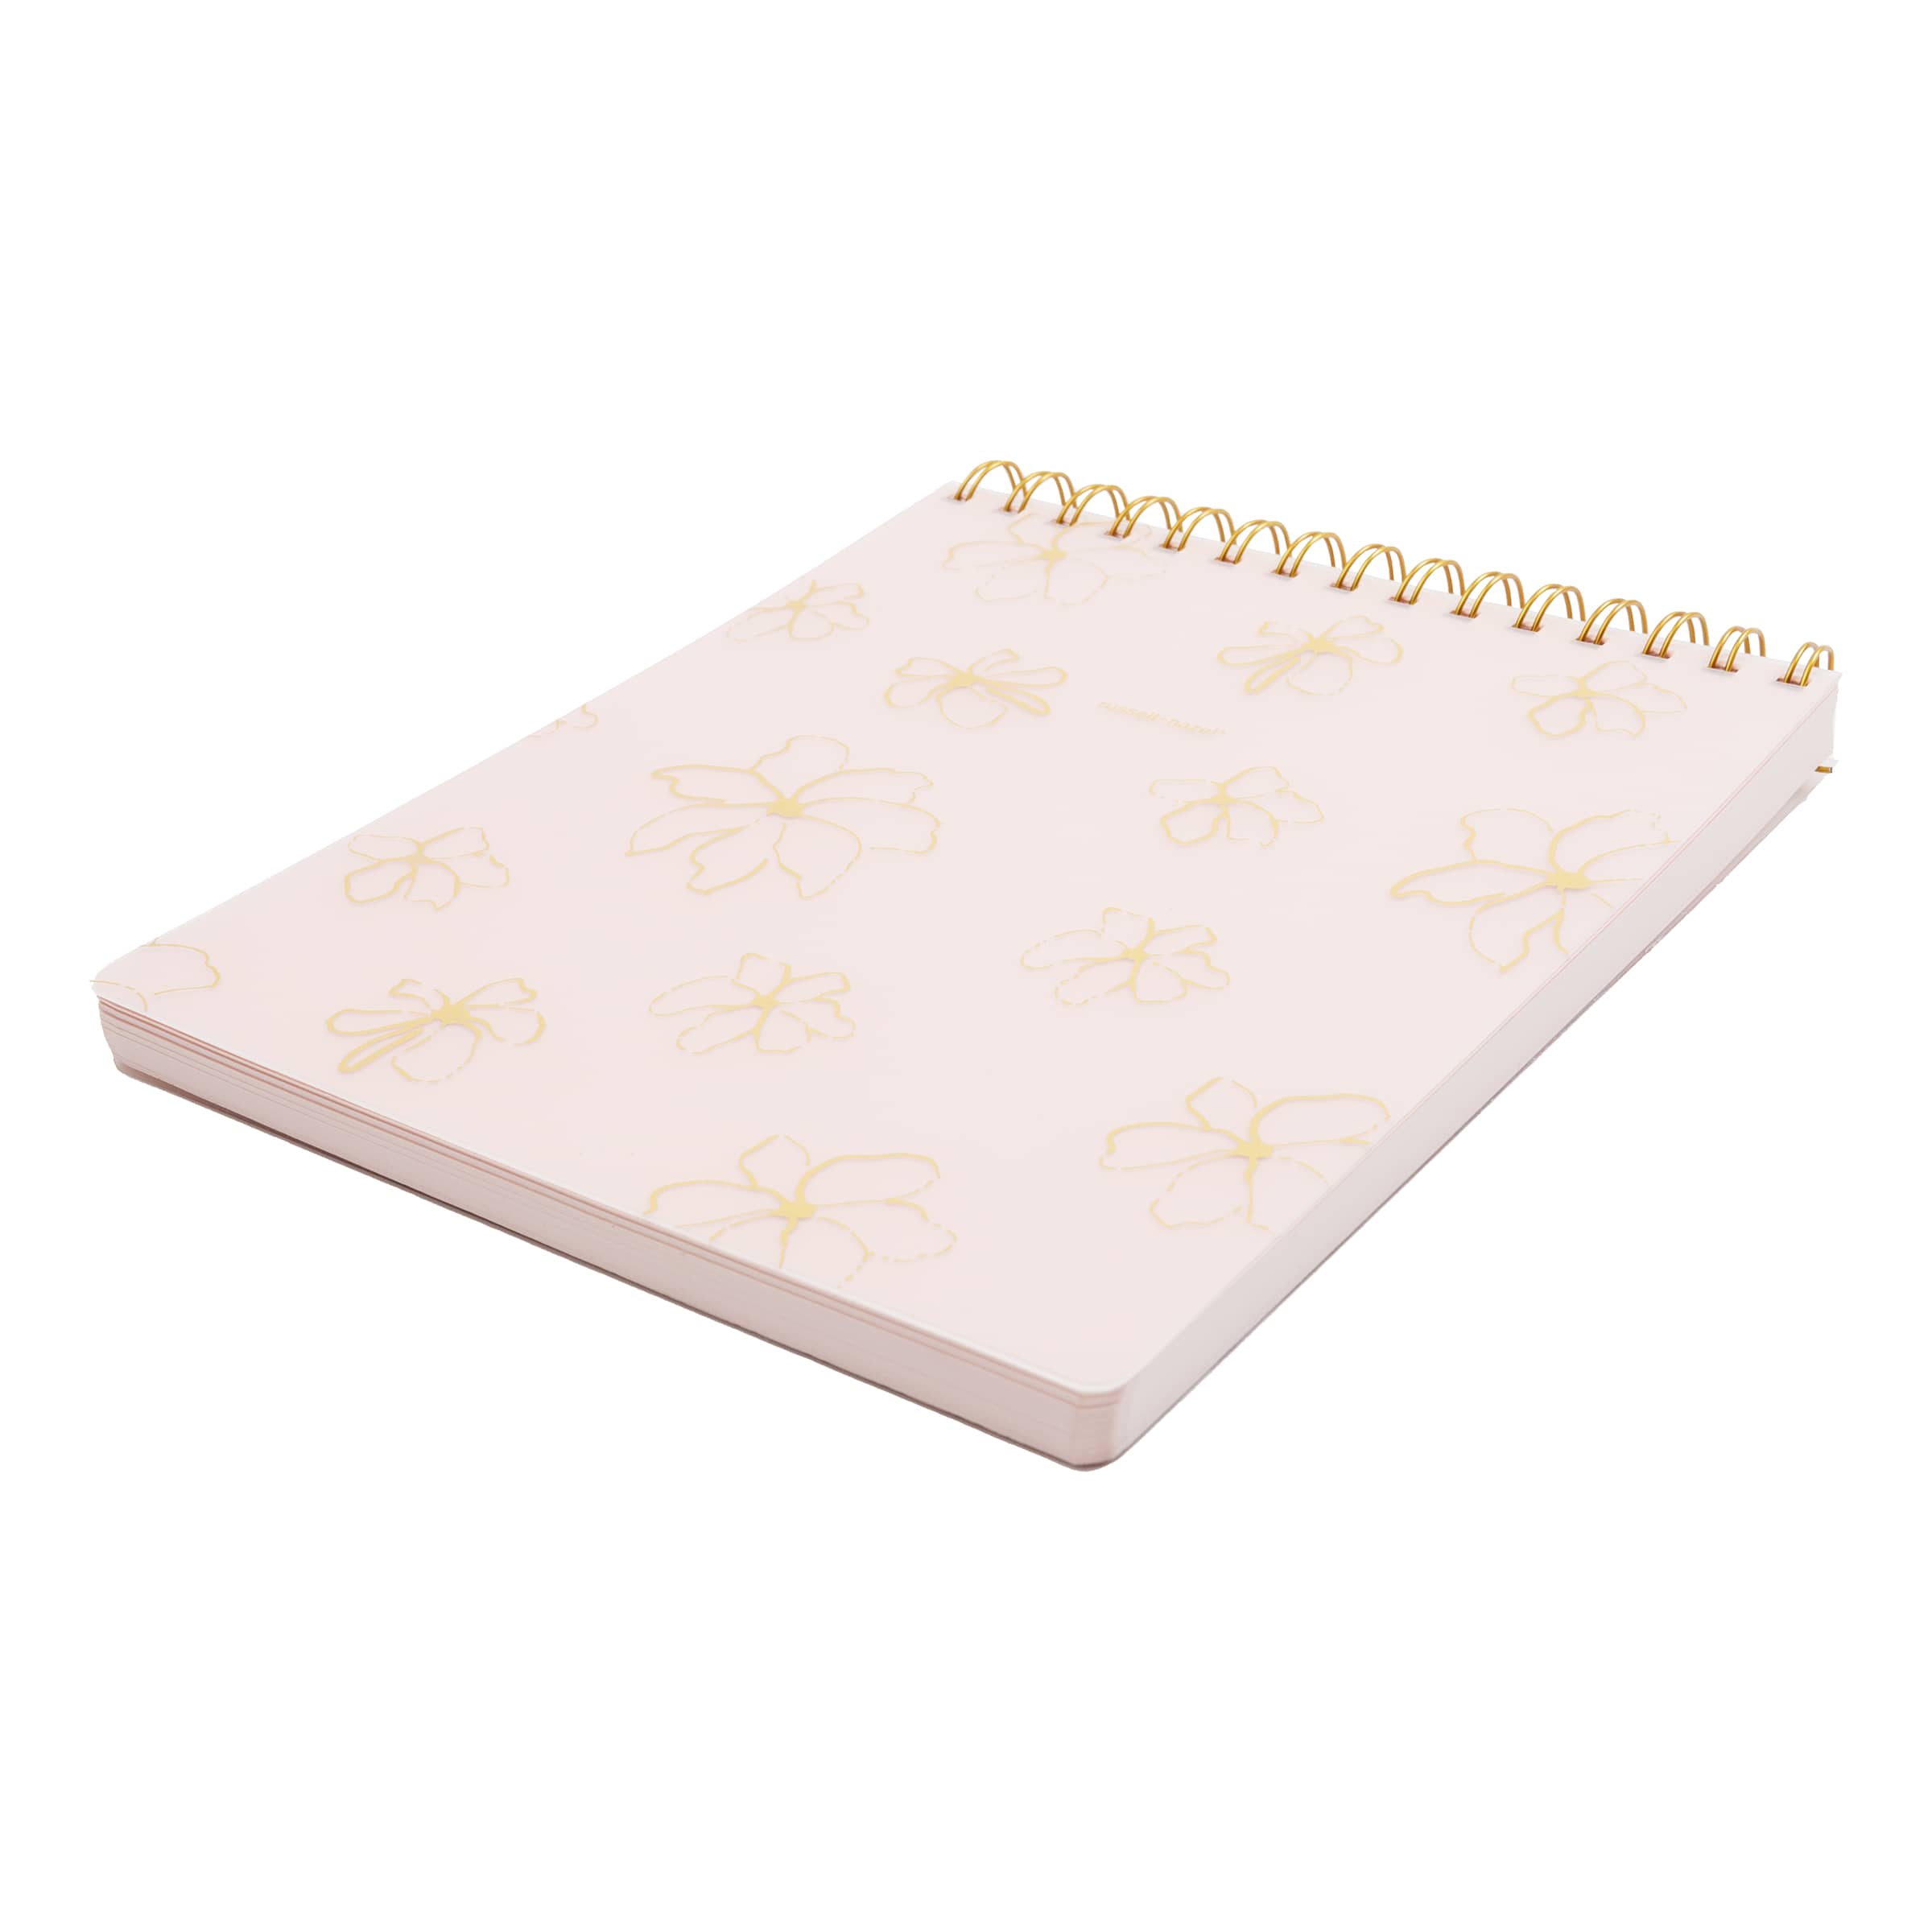 Signature Spiral Notebook russell+hazel Color: White